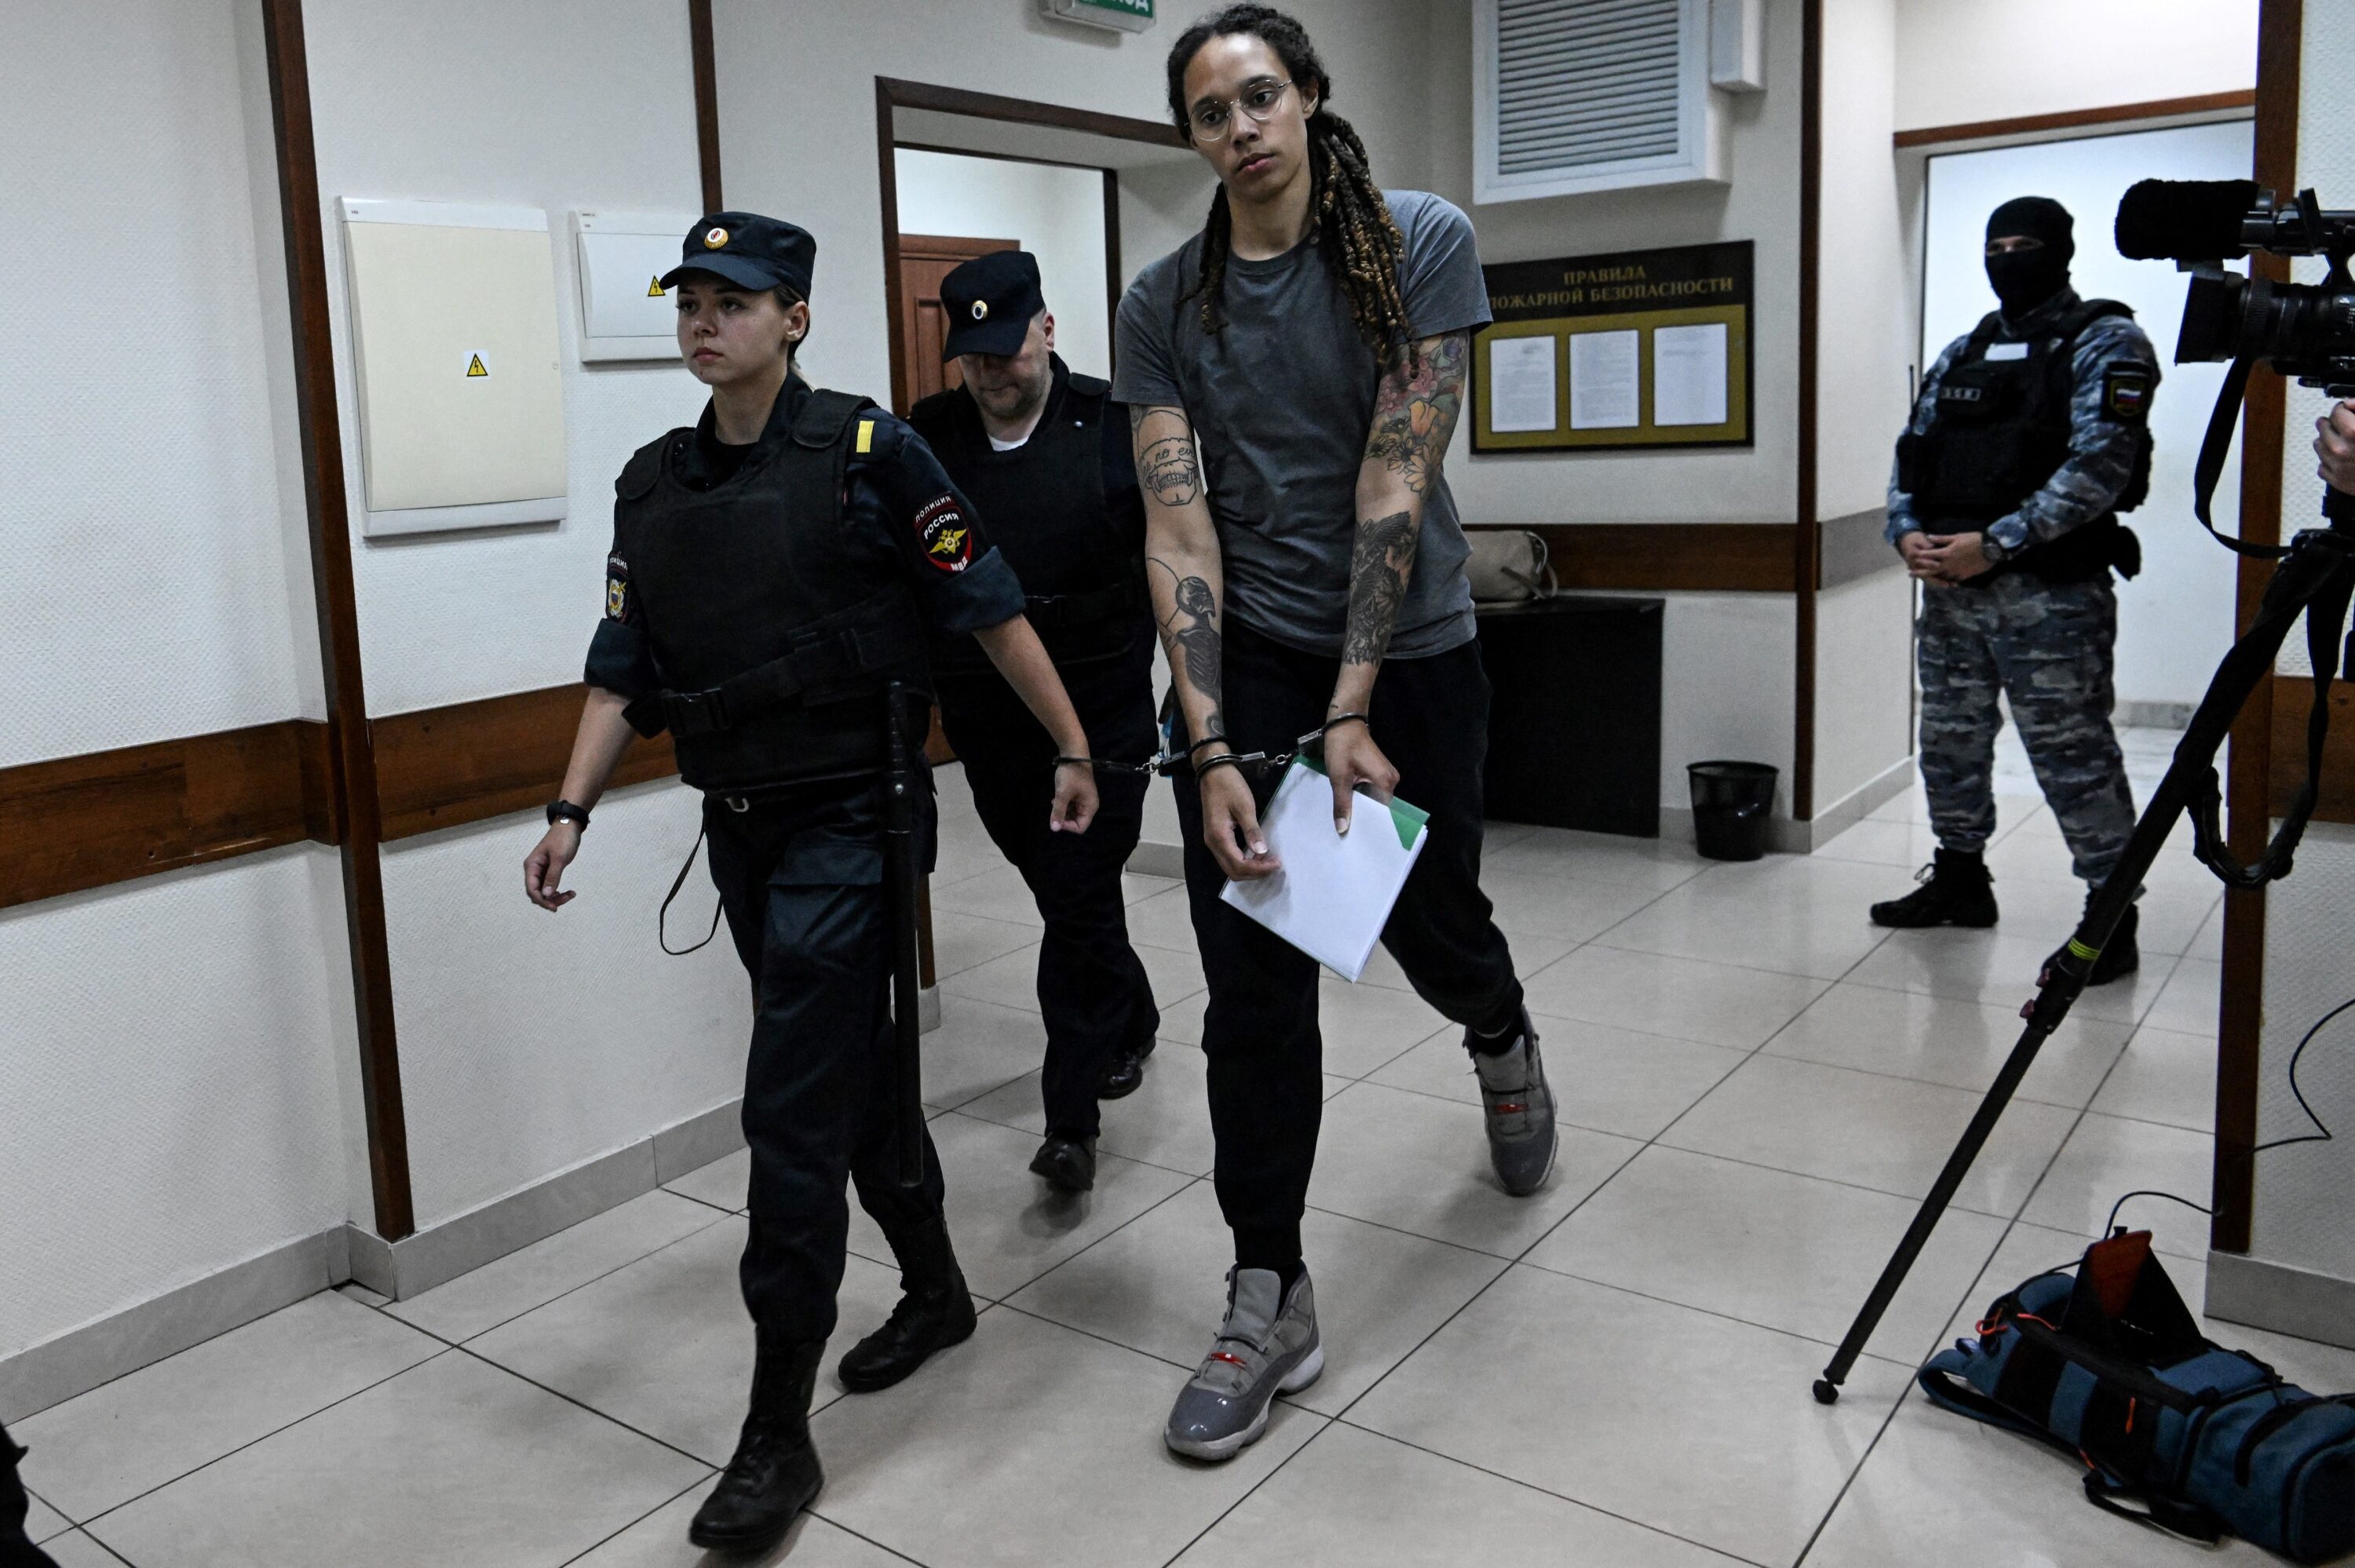 Anxiety about Brittney Griner's freedom mounts amid Russia-Ukraine